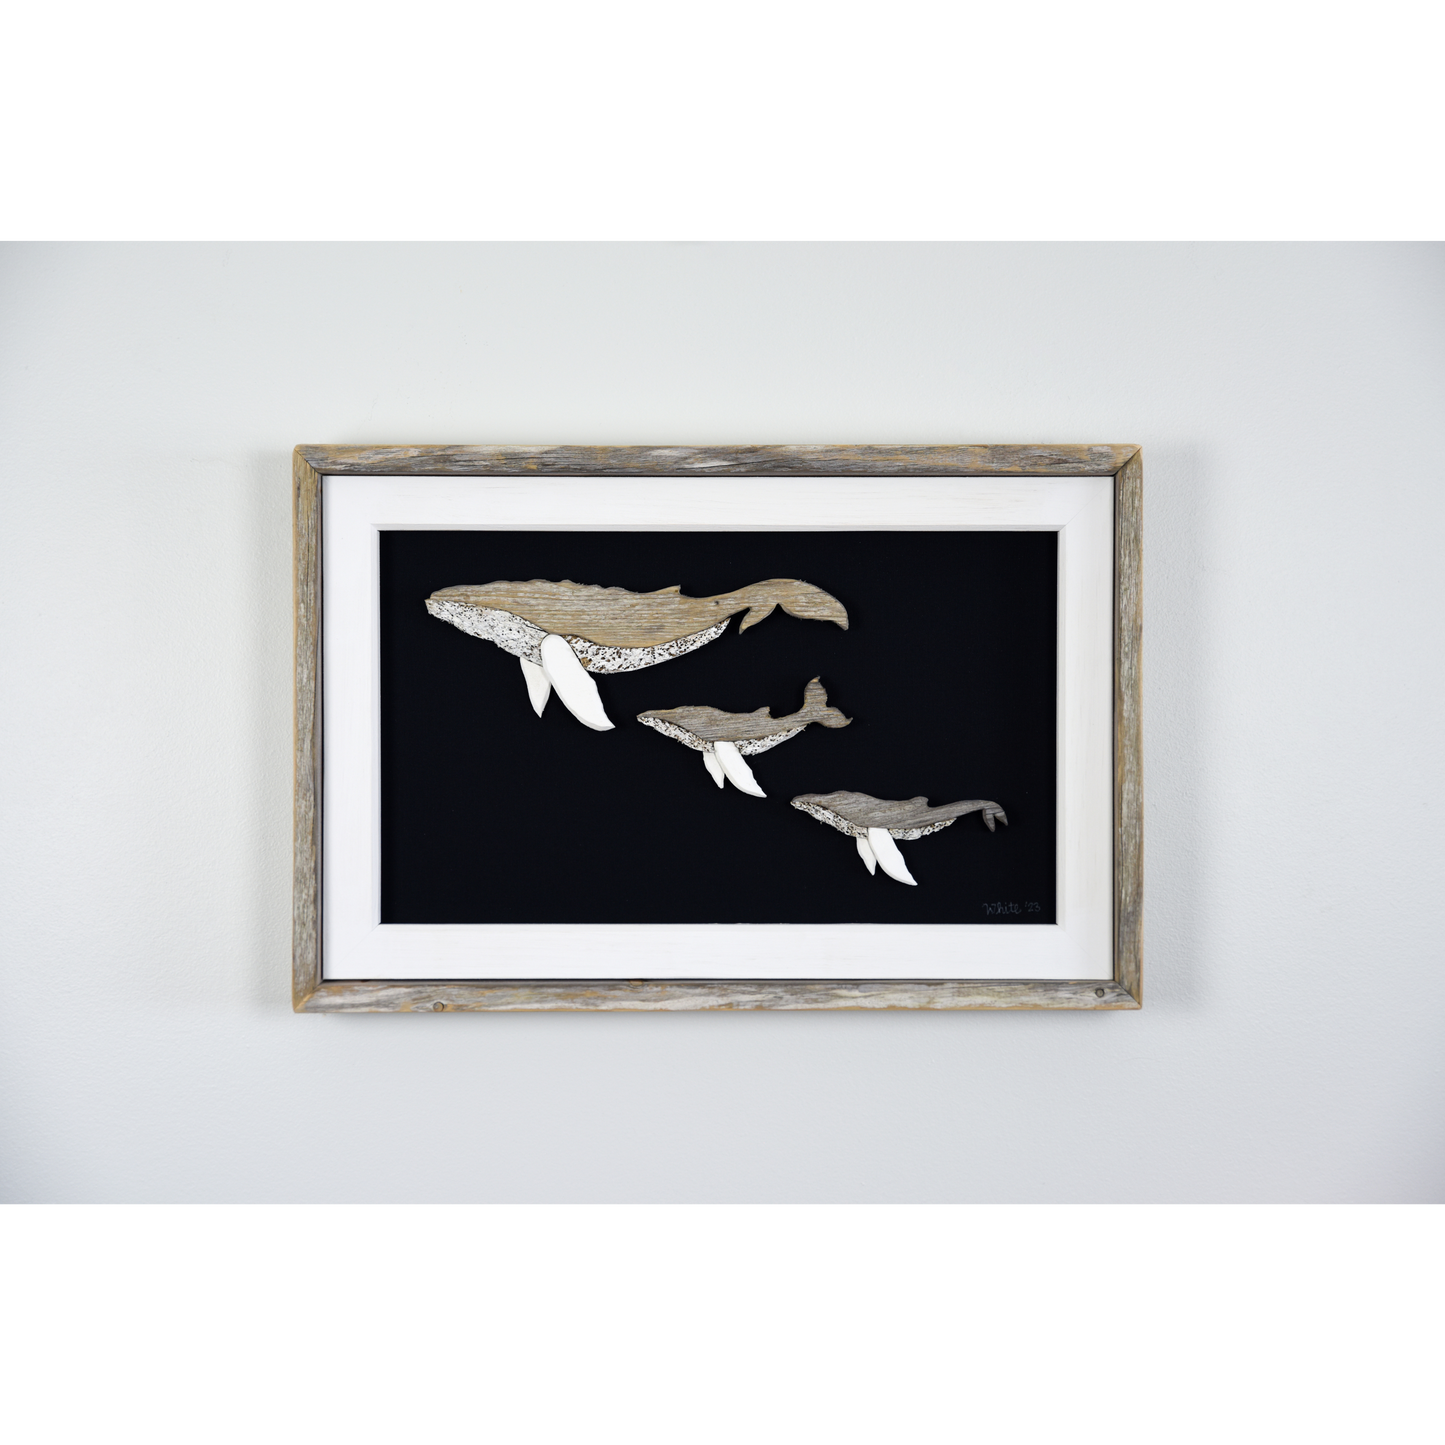  The White's Emporium's driftwood art piece features three humpback whales, a mother and 2 calves, made from reclaimed wood and driftwood sourced in Newfoundland. 